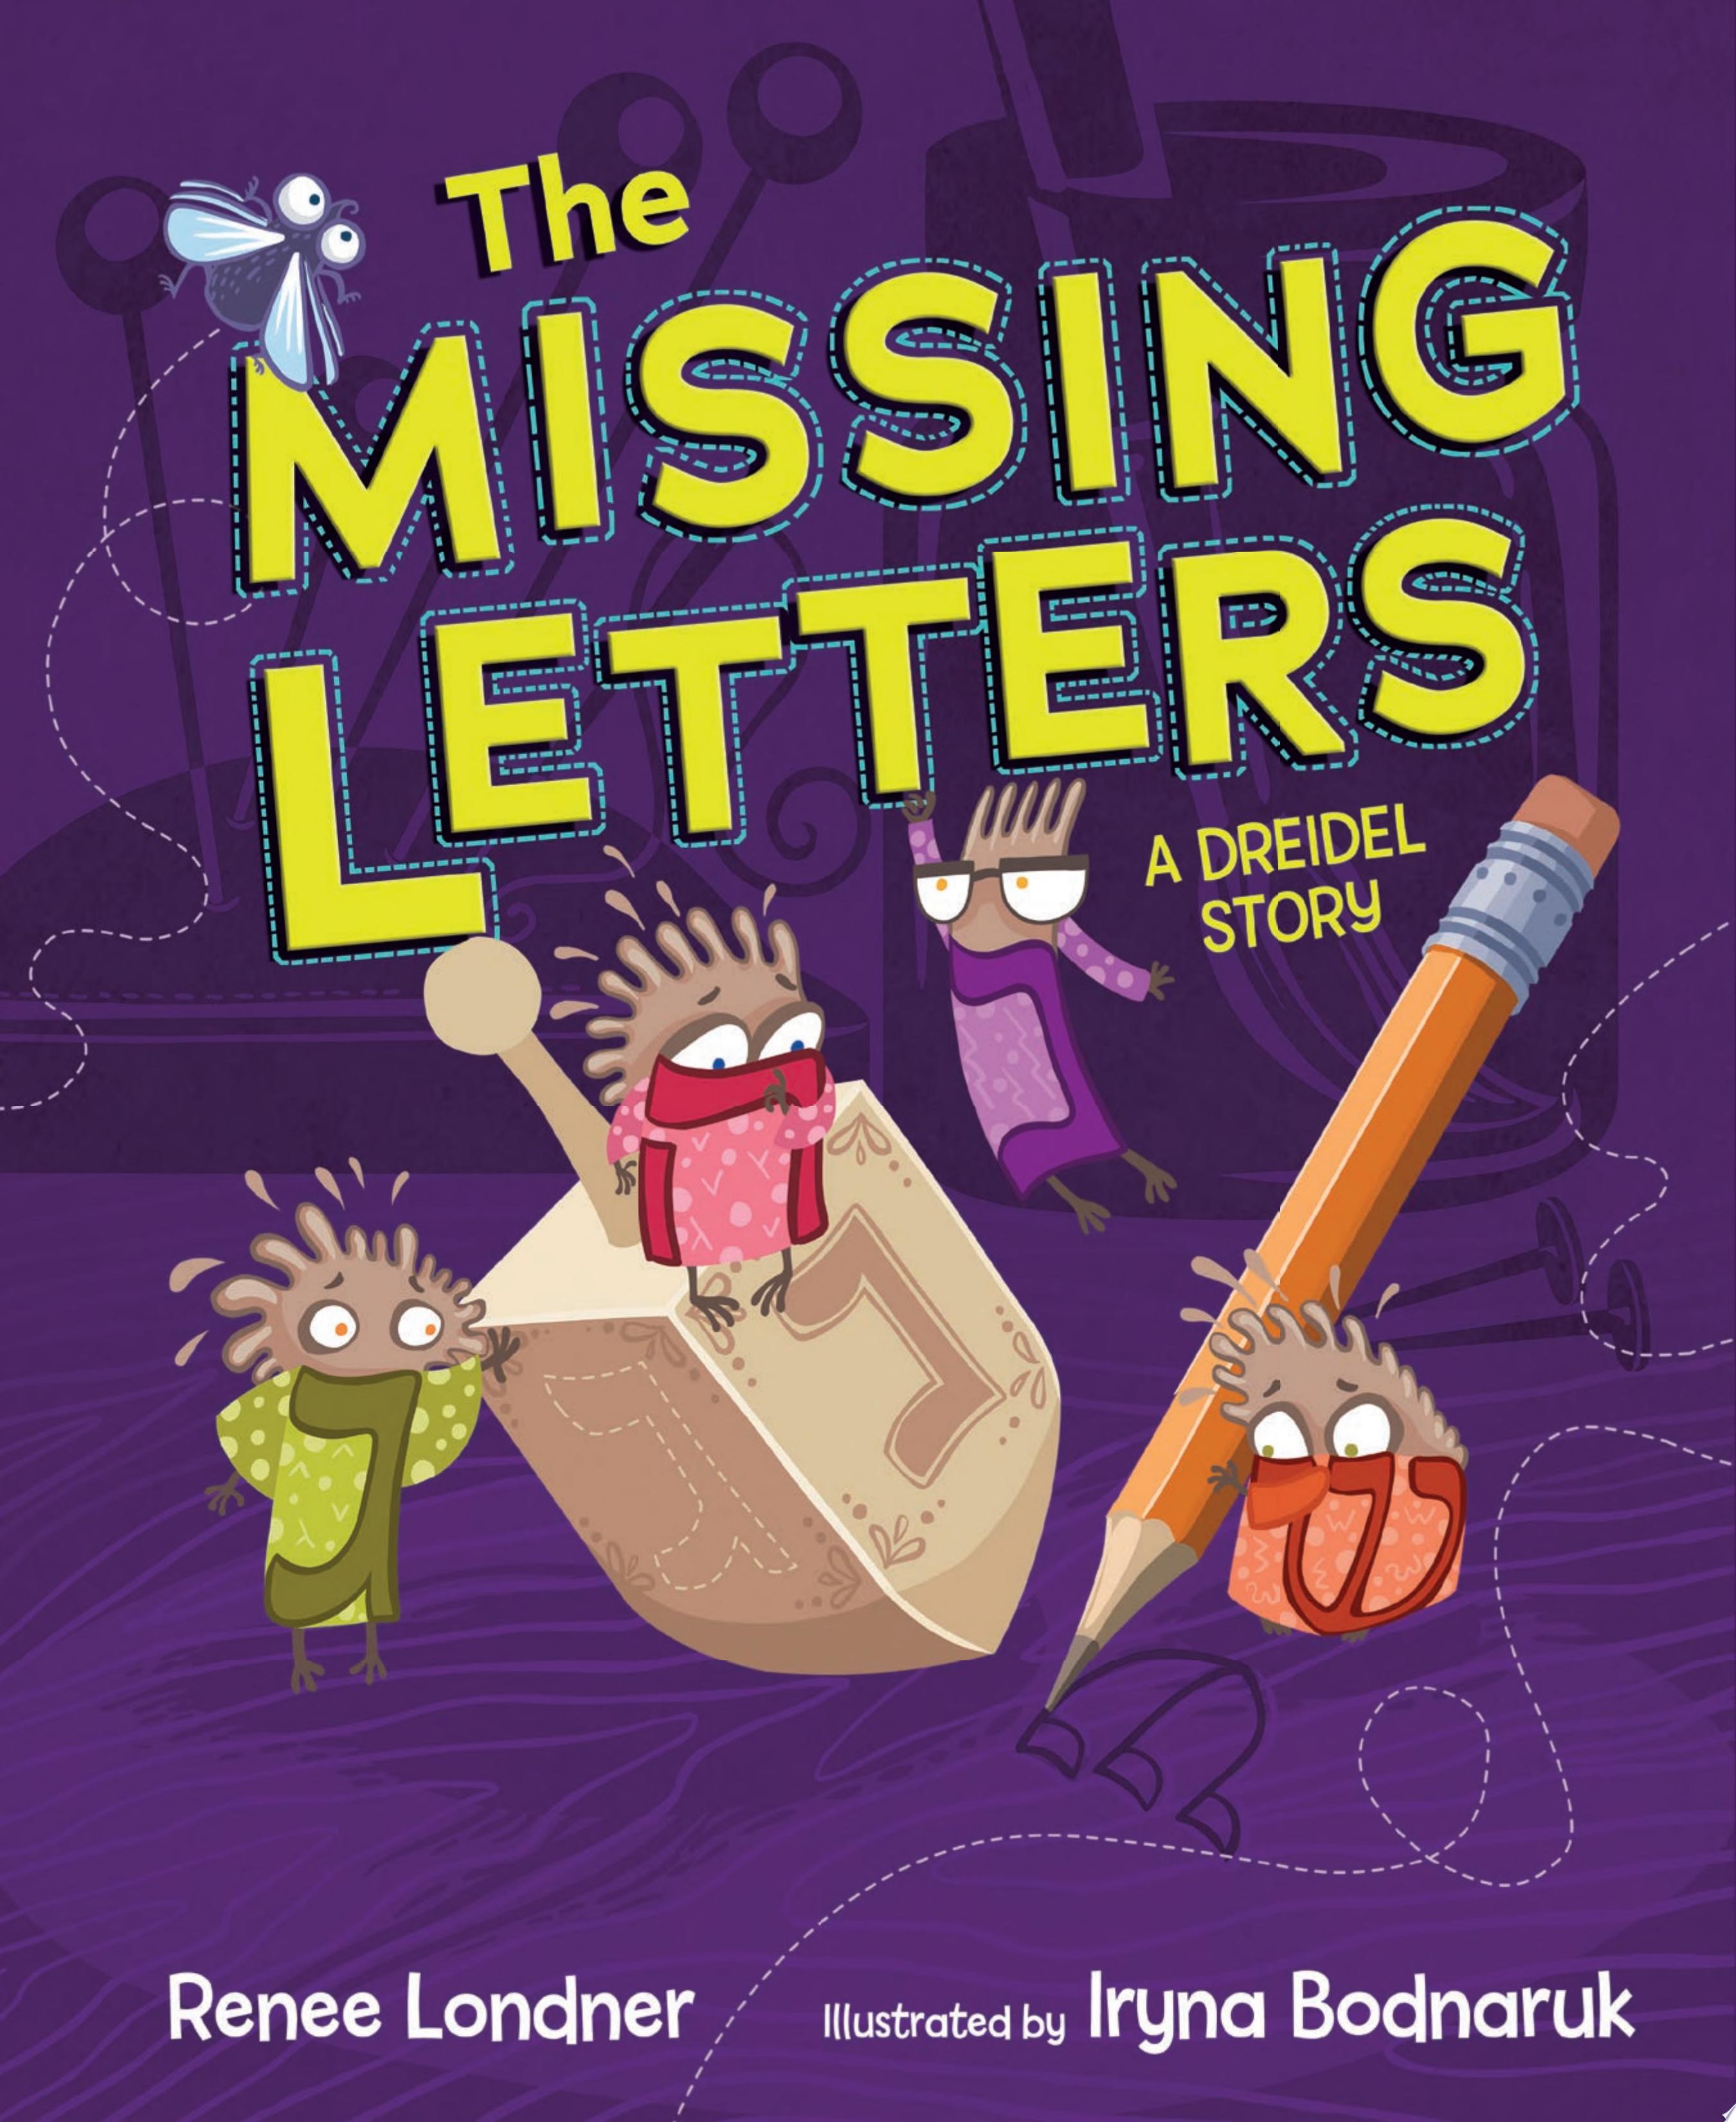 Image for "The Missing Letters"